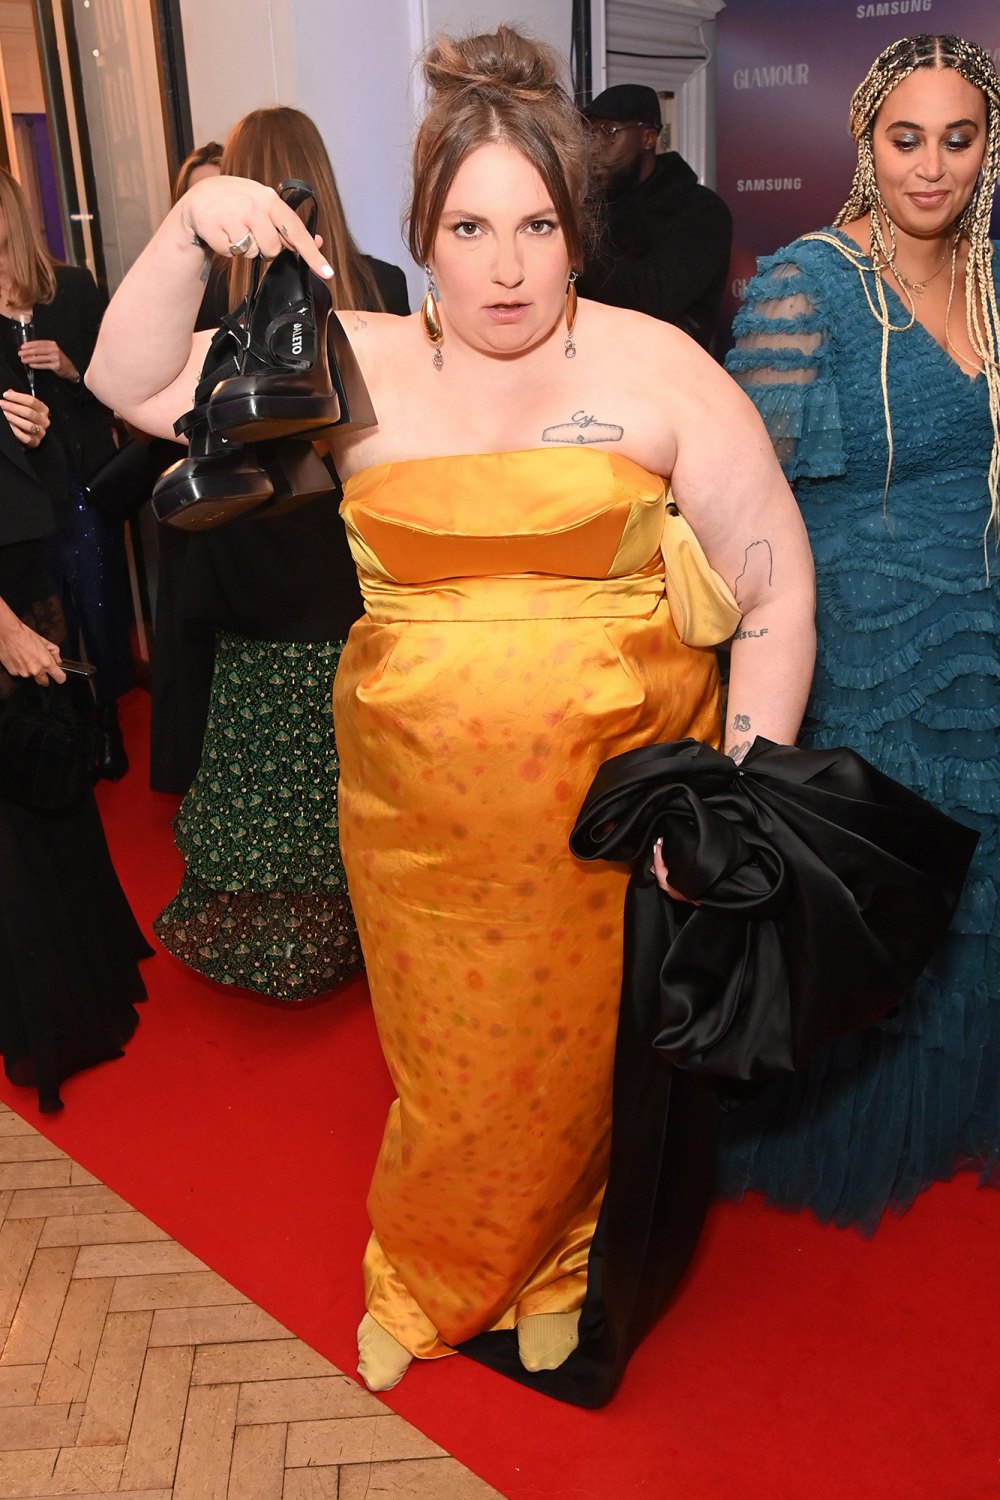 Lena Dunham Ditches Shoes, Wears Just Socks at Glamour Women of the Year Awards